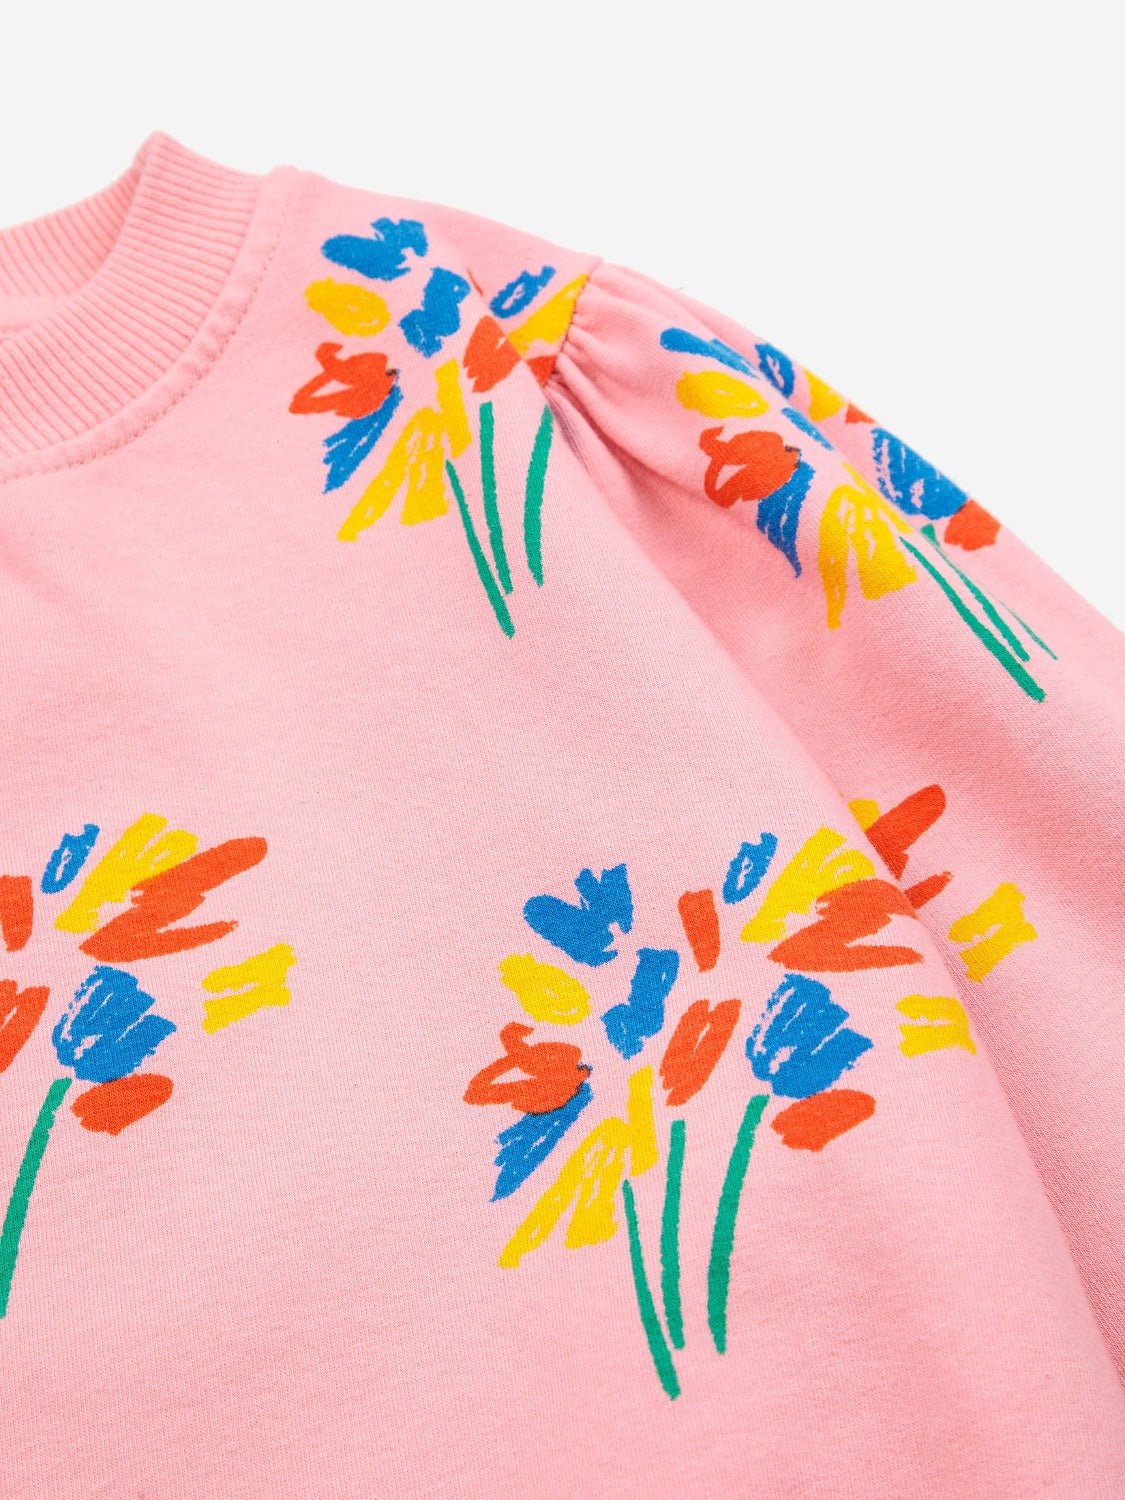 Fireworks All Over Sweatshirt by Bobo Choses - Petite Belle